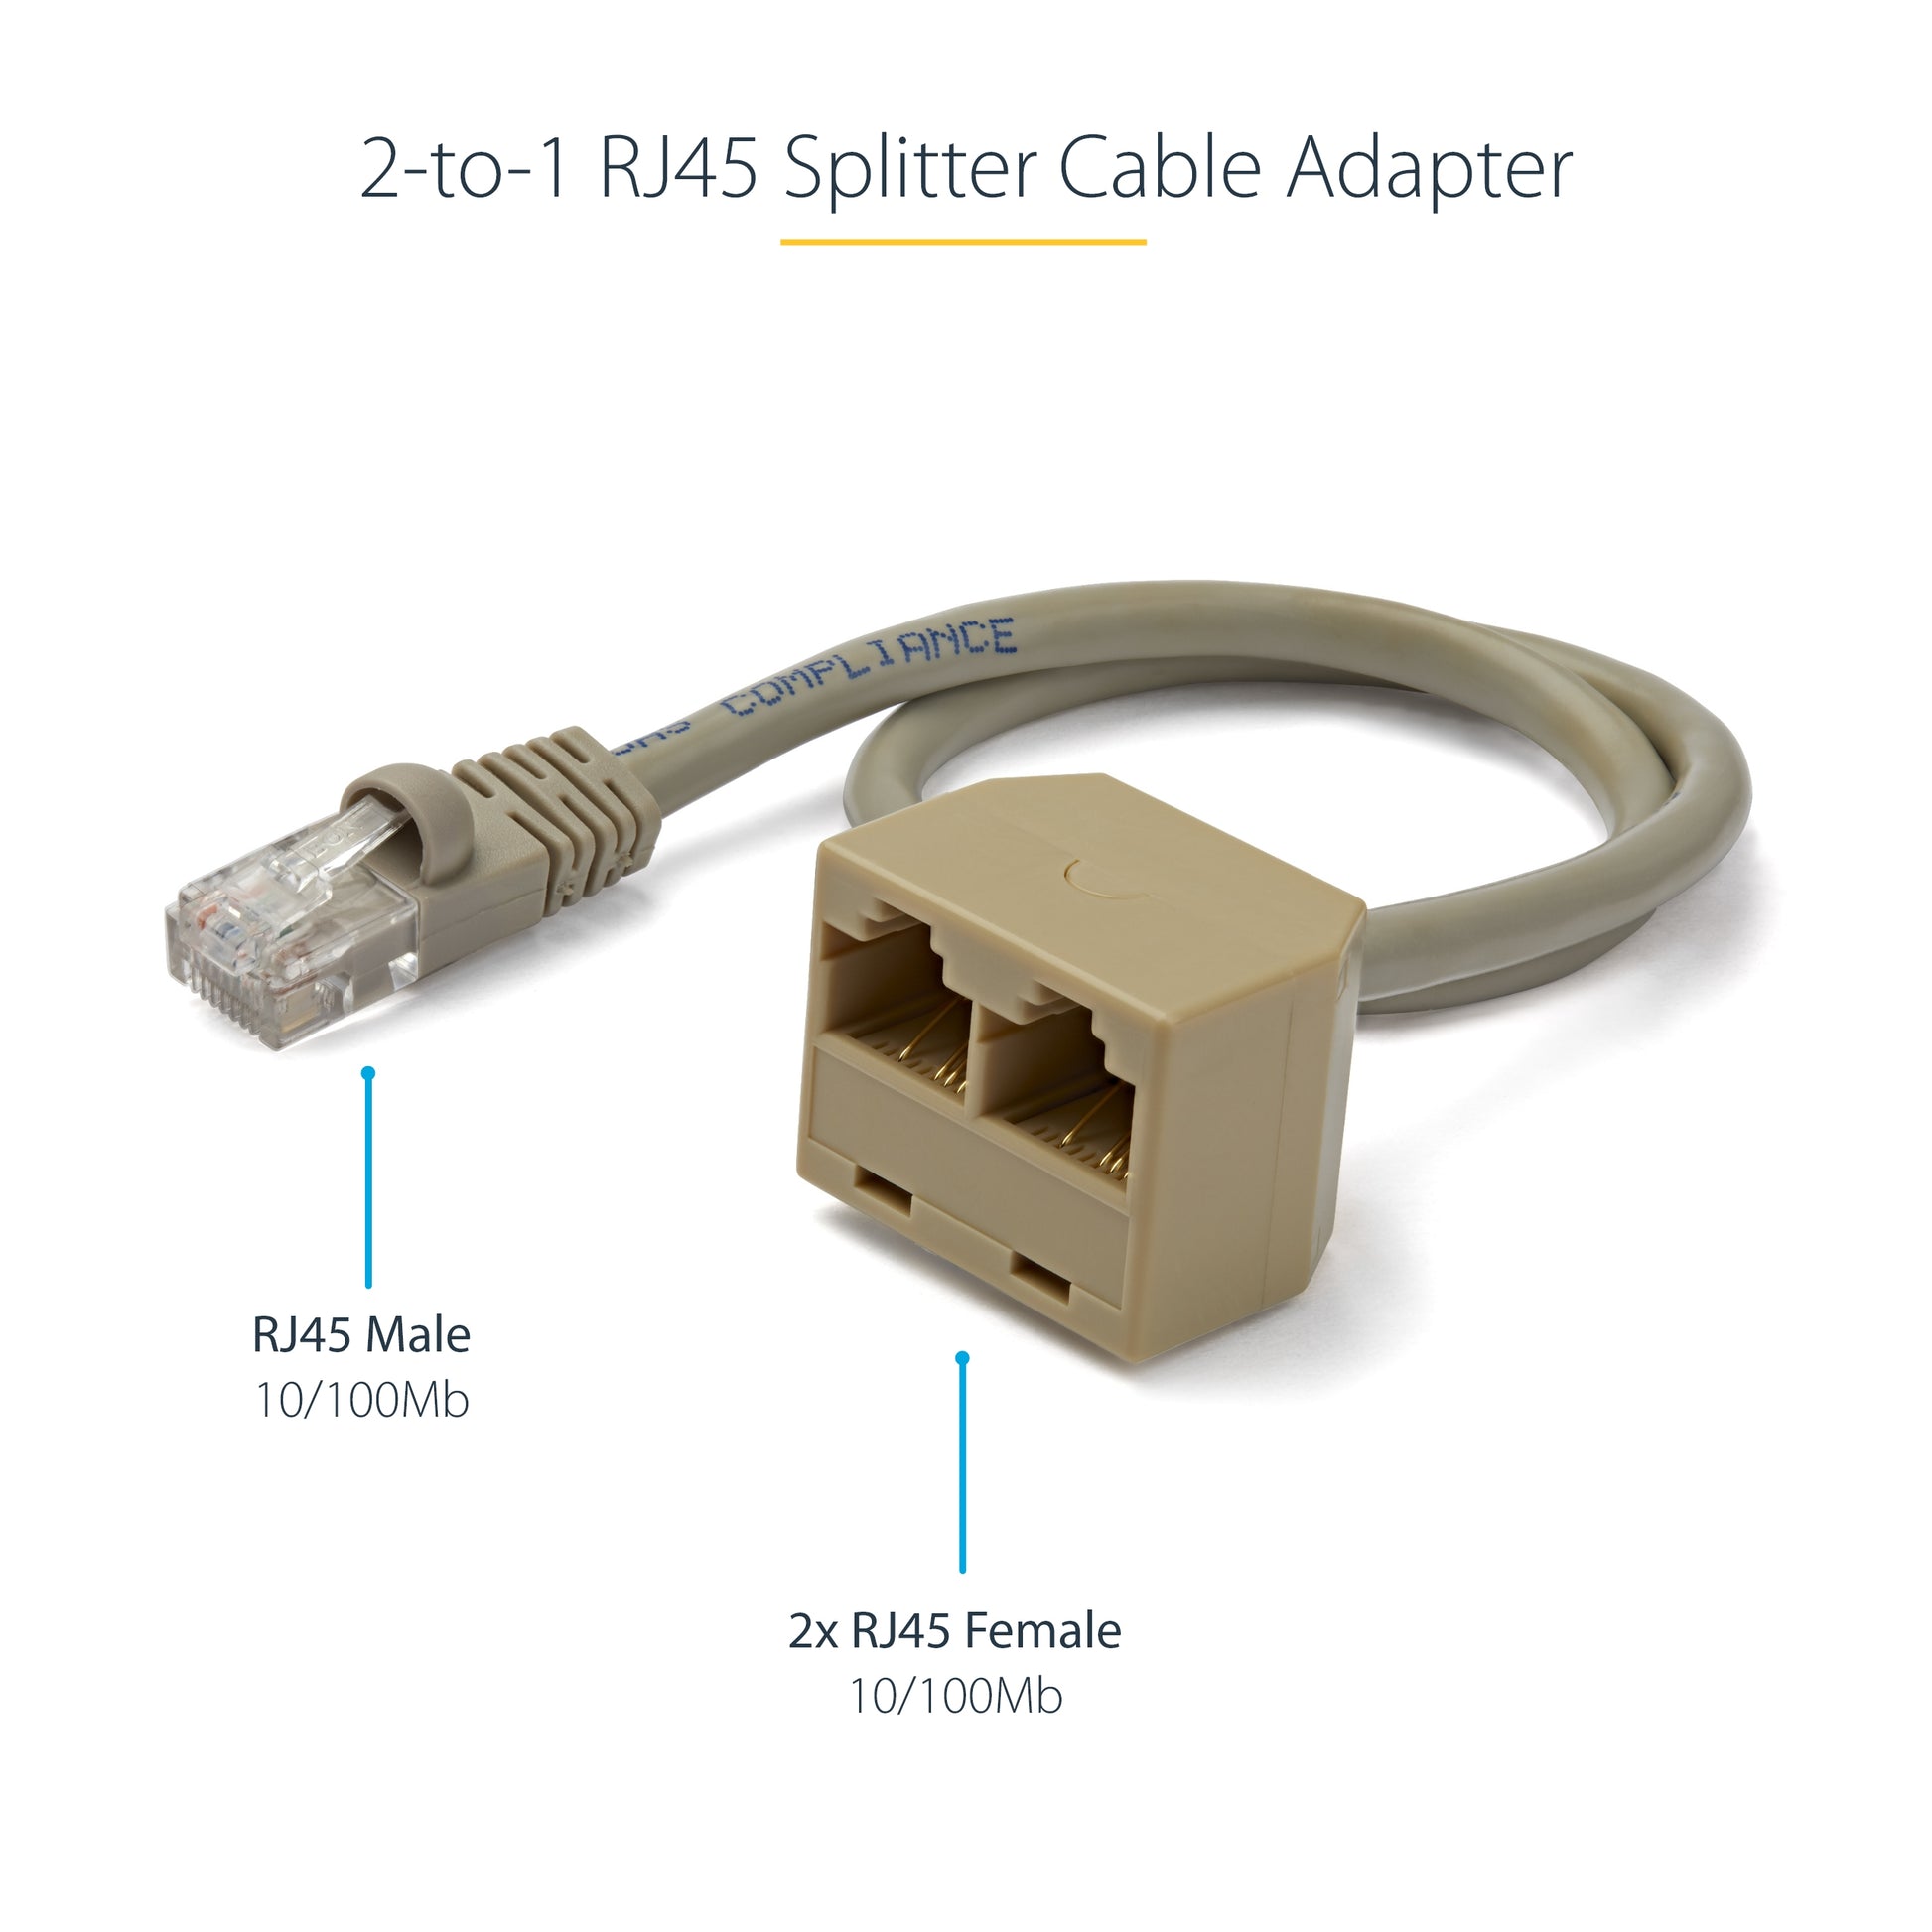 StarTech.com 2-to-1 RJ45 Splitter Cable Adapter - F/M-6